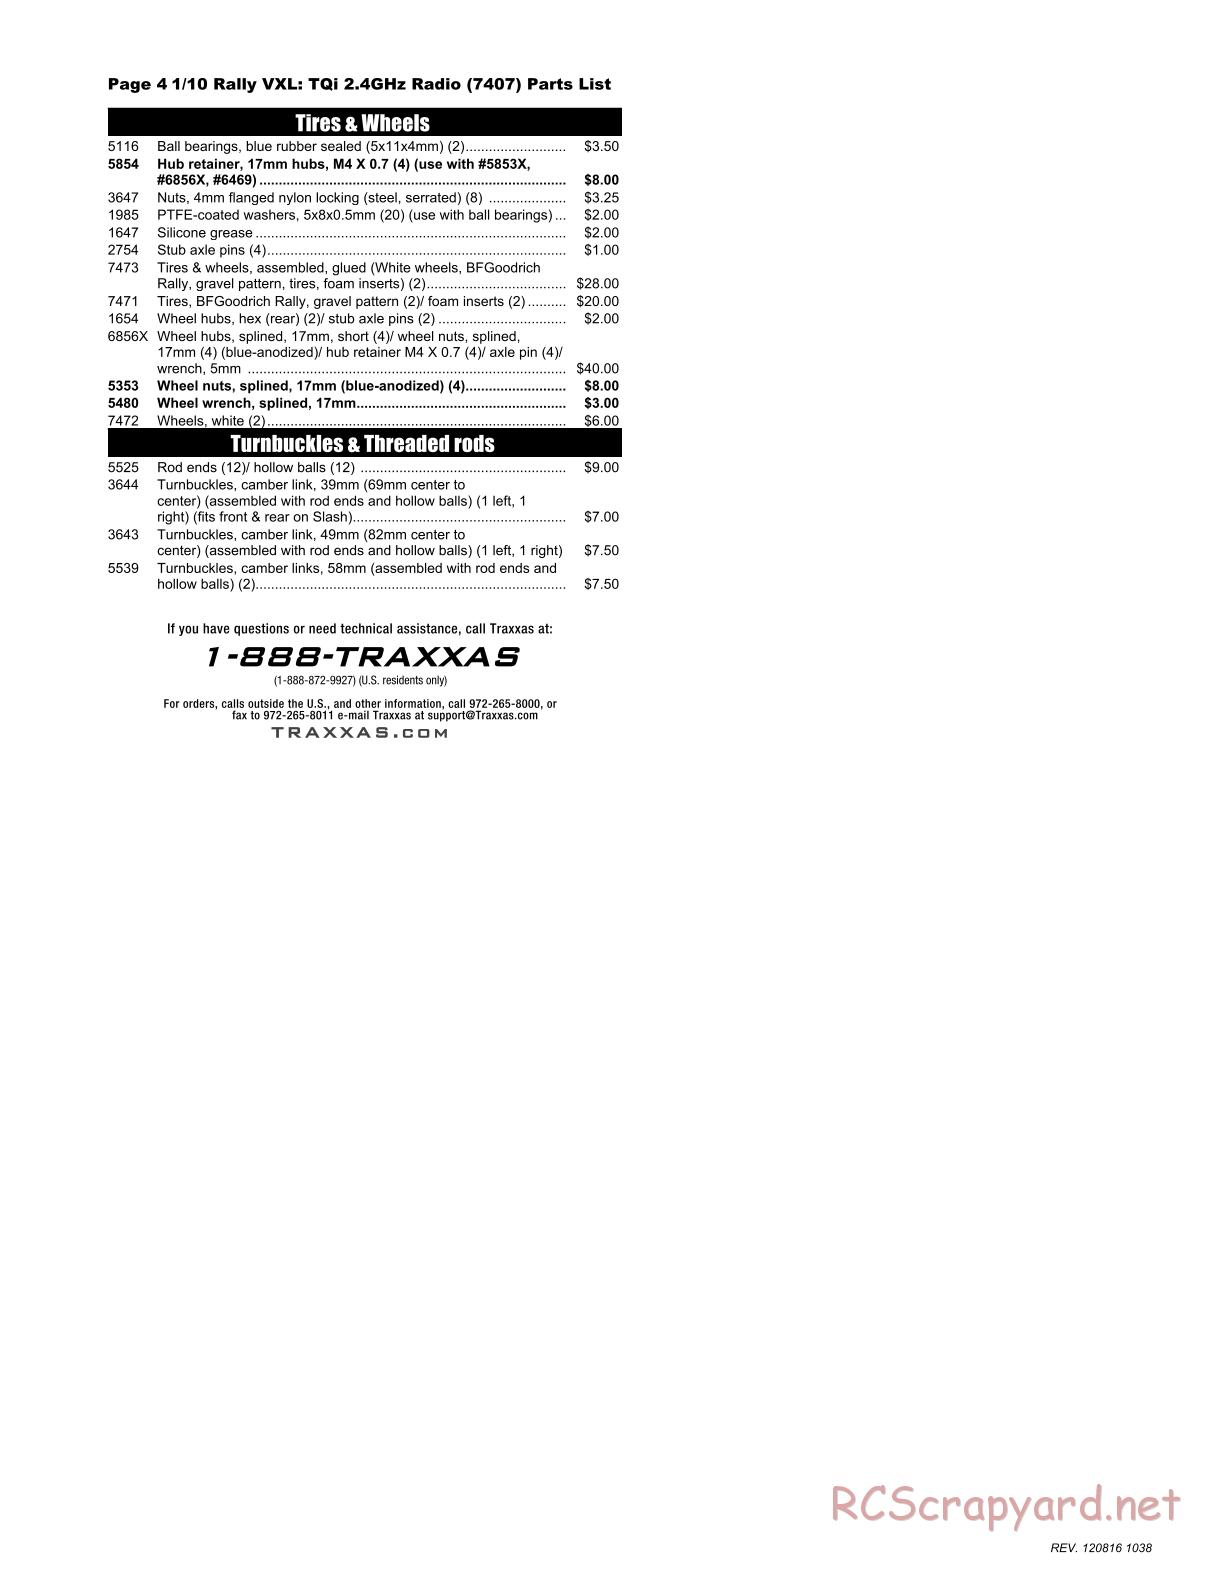 Traxxas - Rally (2012) - Parts List - Page 4